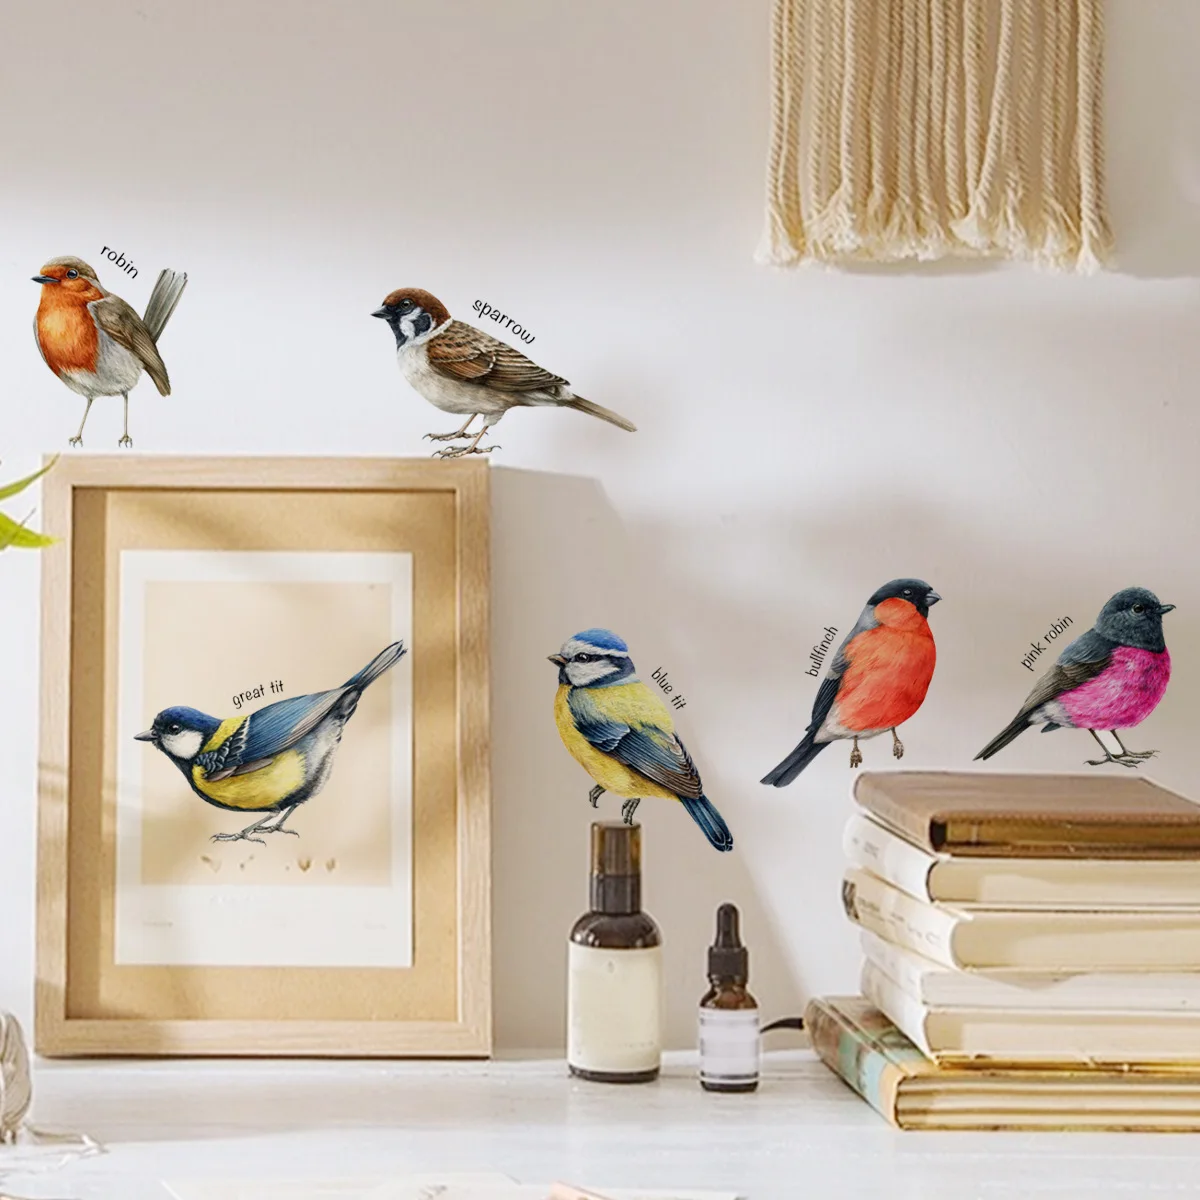 12*50cm English Word Bird Wall Stickers Wall Children's Living Room Bedroom Study Decorative Wall Stickers Wallpaper Ms4278